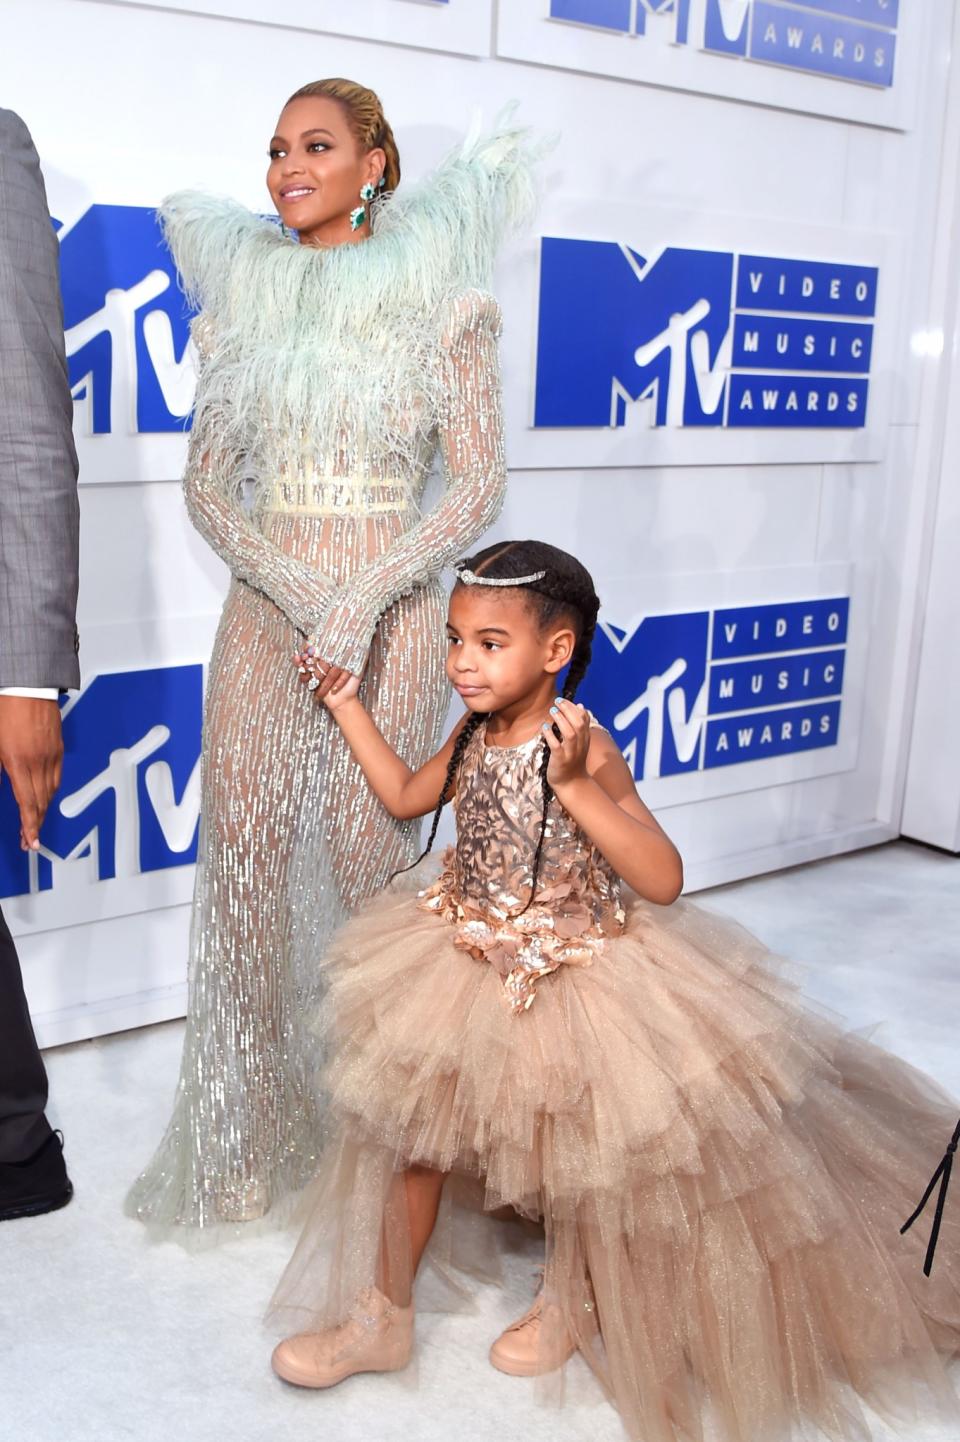 <p>Beyonce absolutely slayed at the MTV Video Music Awards in an opulent Francesco Scognamiglio number. However, it was her four-year-old daughter who stole the show as she joined her mum in a matching dress and tiara making her the new Queen B. [Photo: Getty] </p>